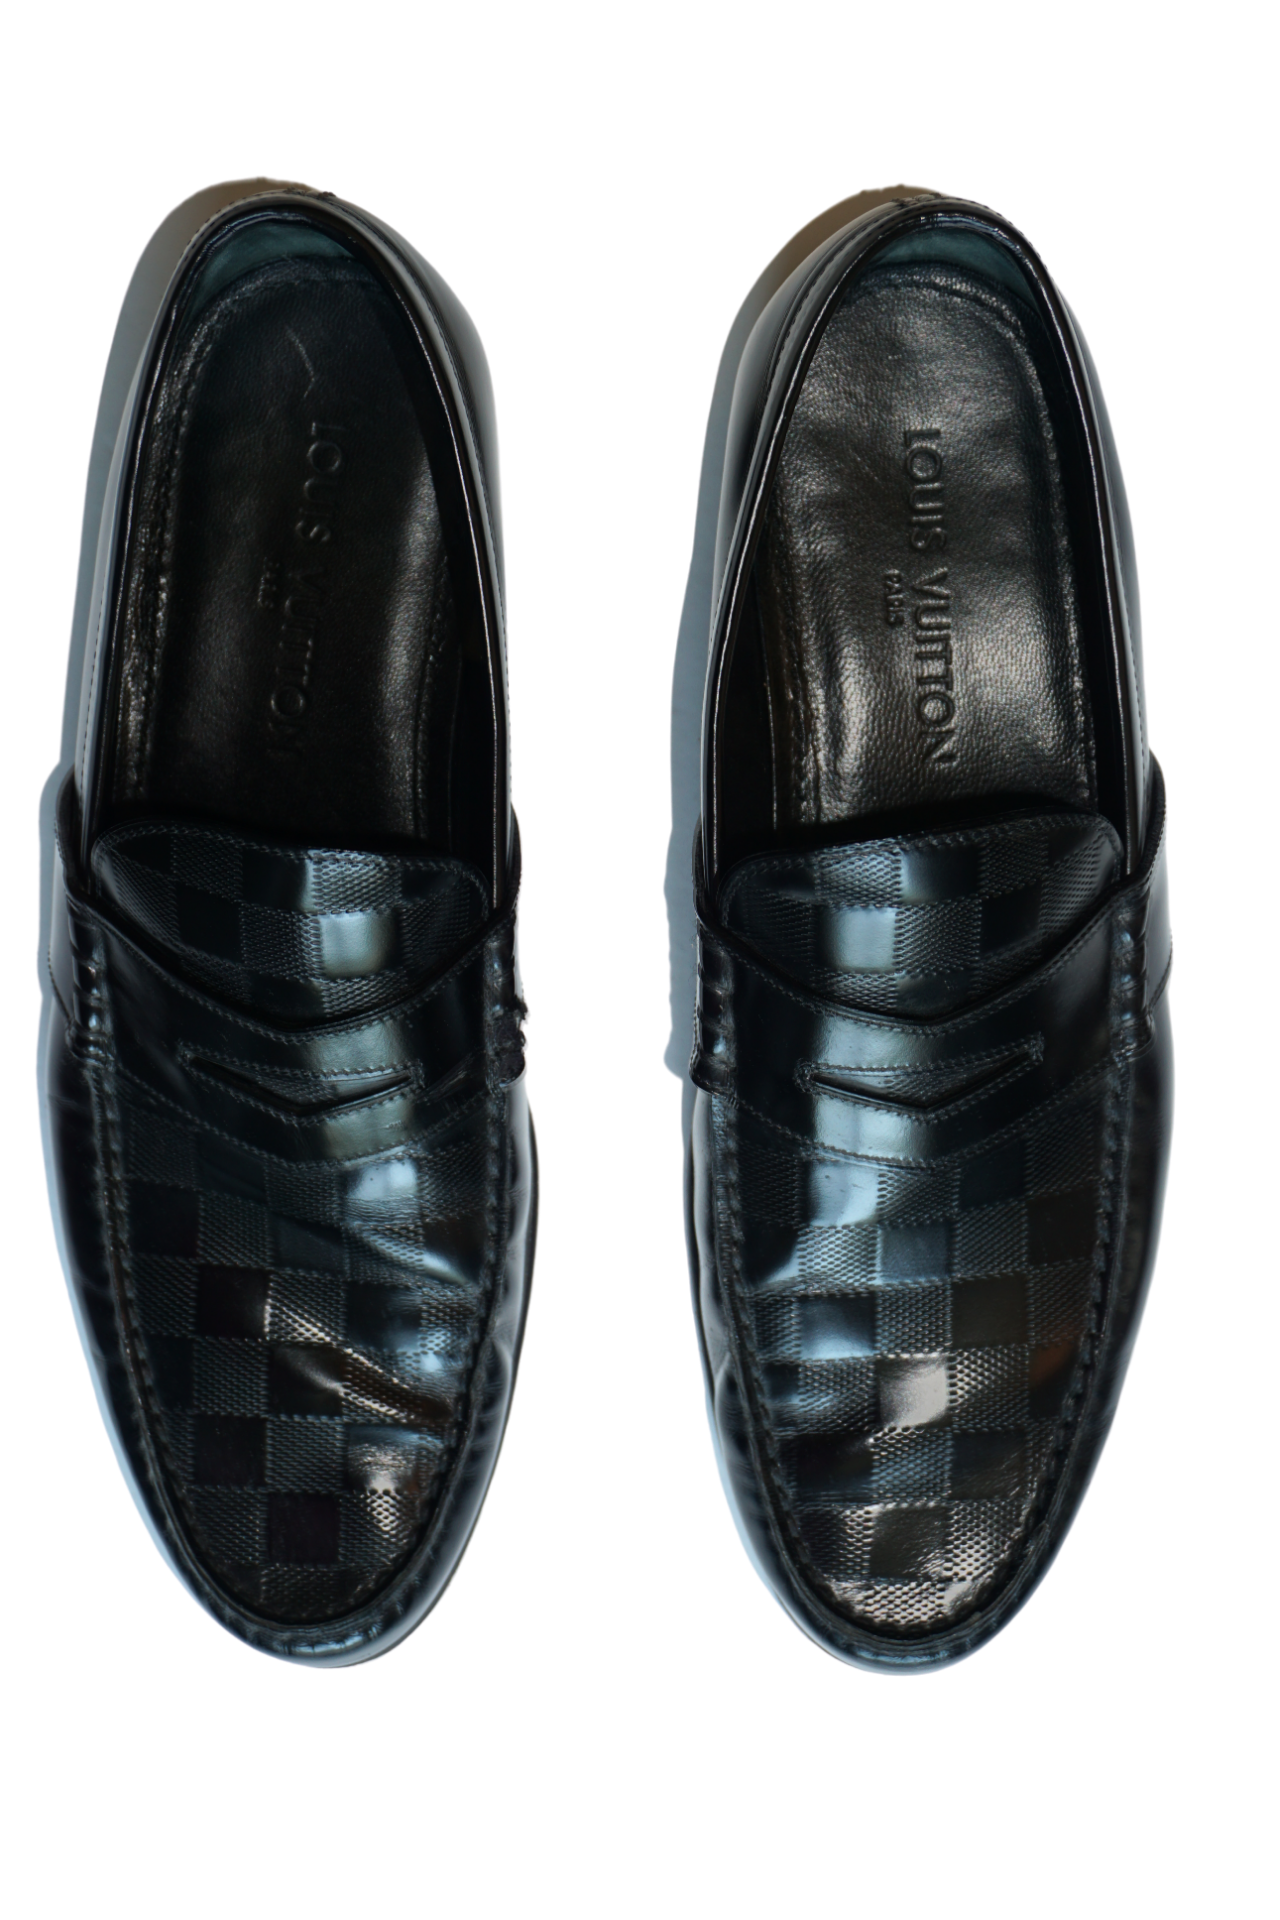 Louis Vuitton Black Damier Embossed Outline Dress Loafers Size 43